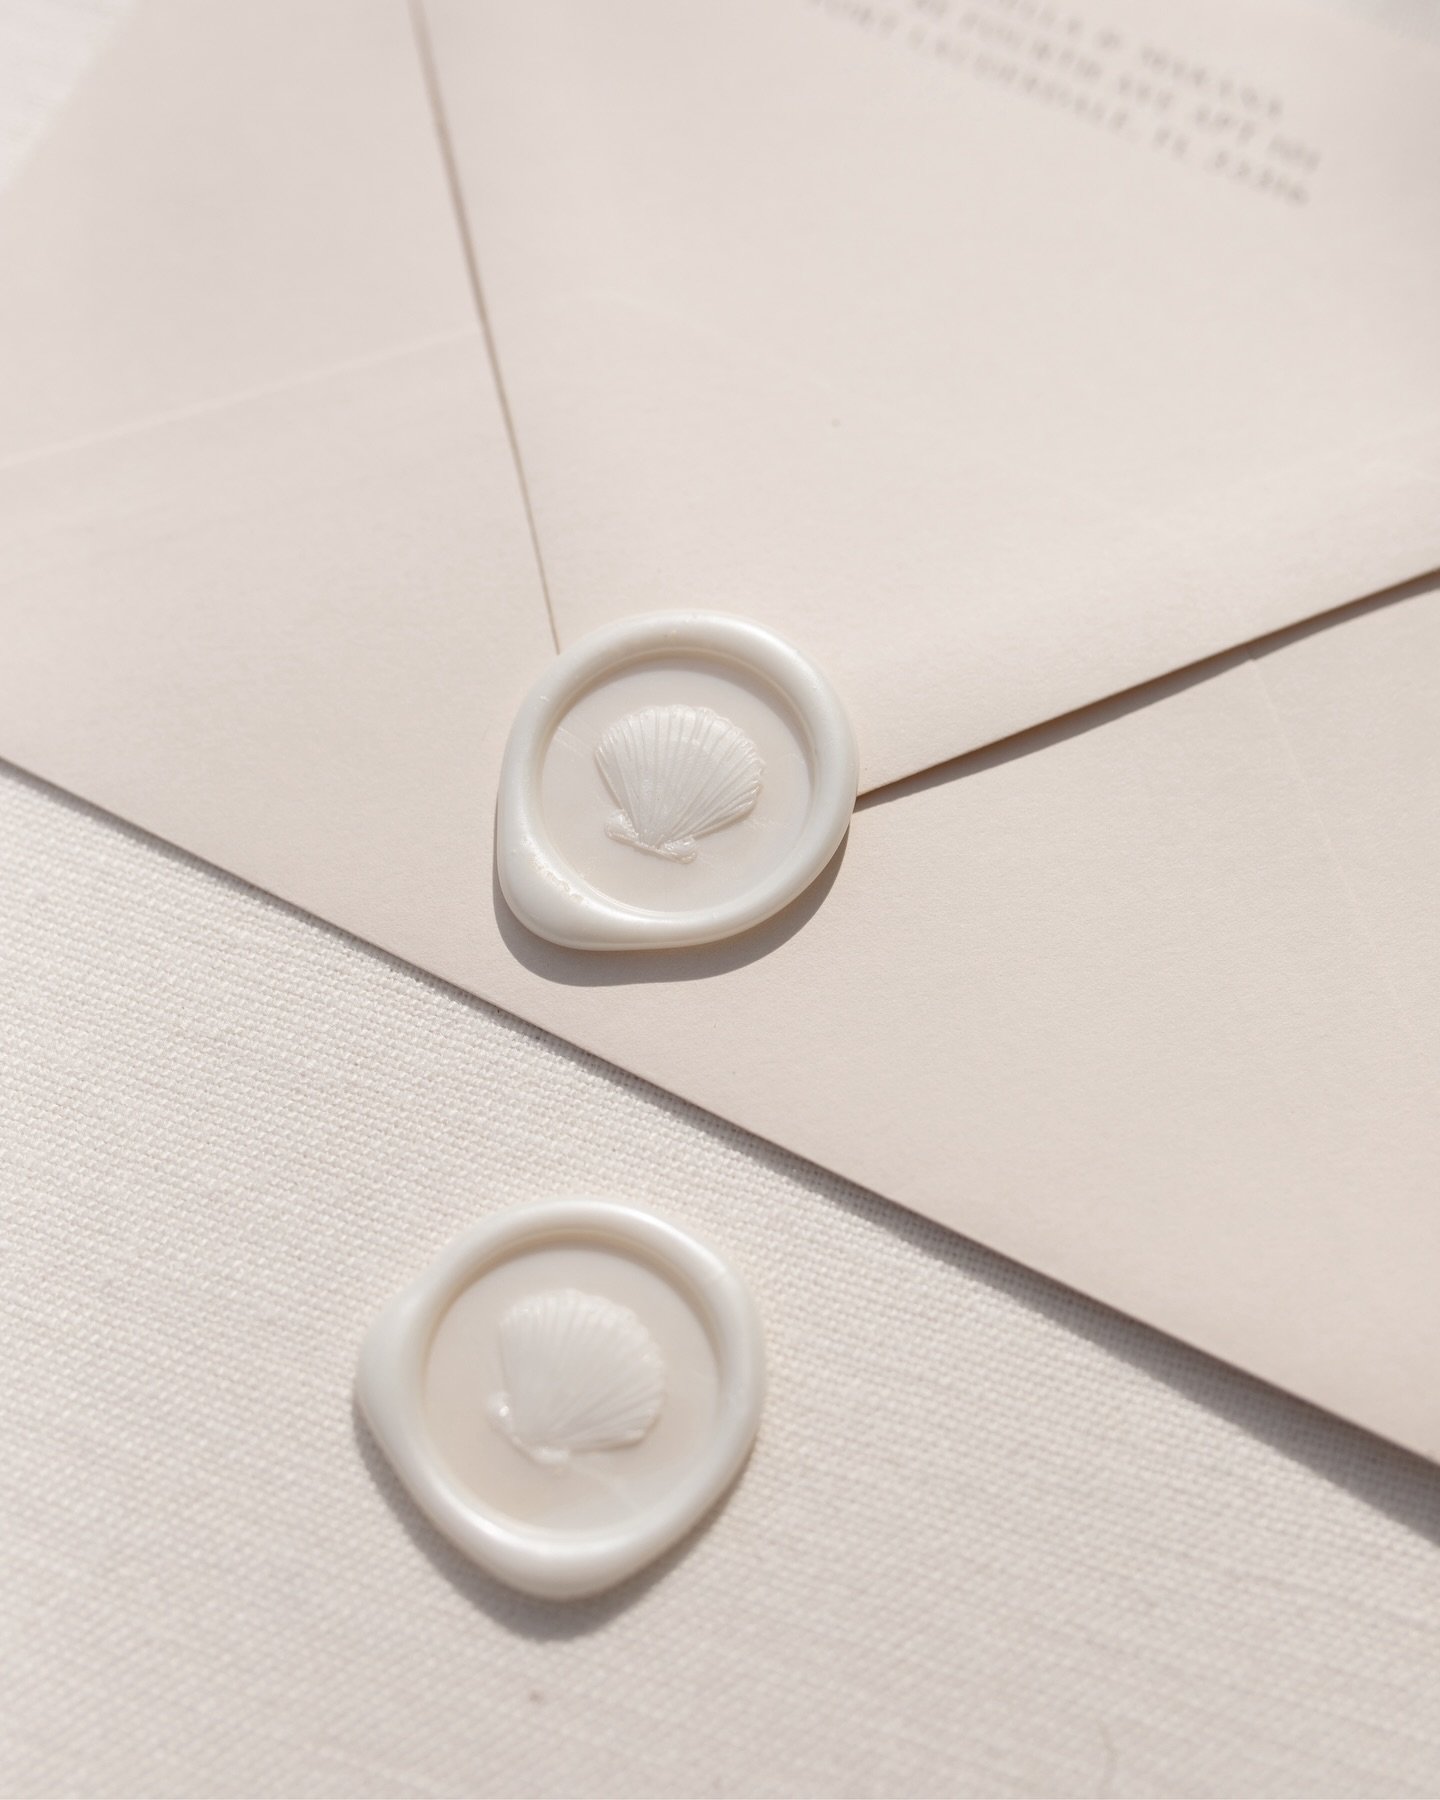 Embellishments; the extra bit that makes your wedding stationery even more personal to you.  These pearlescent shell wax seals were part of some beautiful Save The Dates for G + K. 🤍🐚

#savethedate #stationerydesign #keyswedding #summerwedding #wax